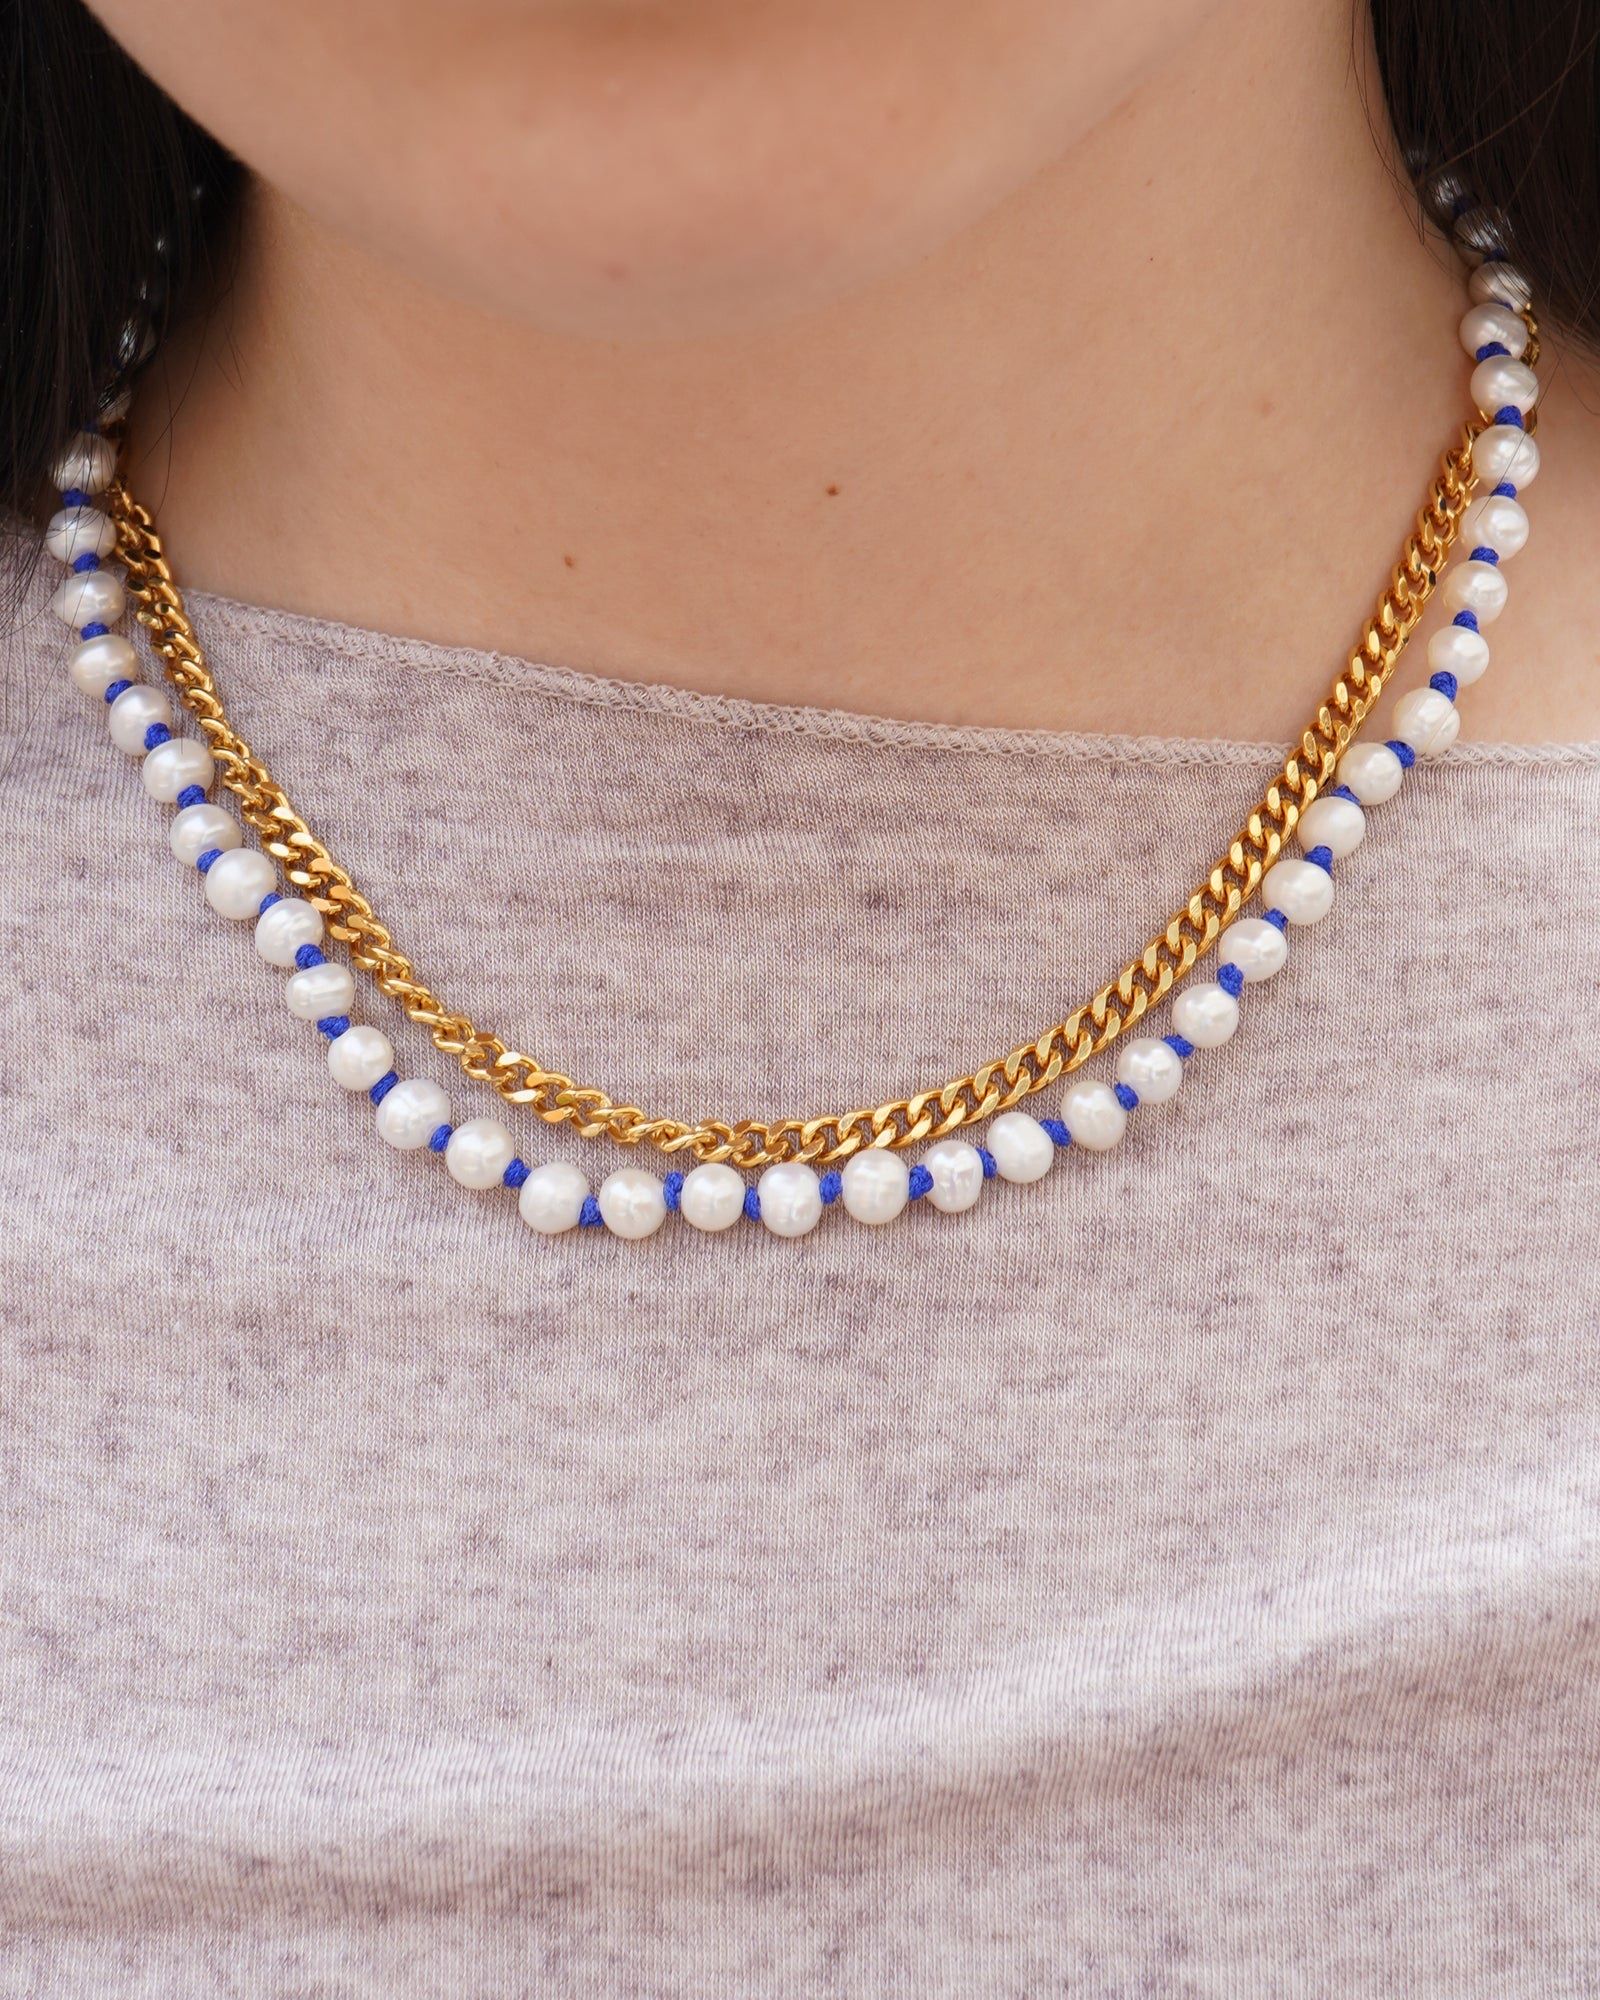 Necklace Blue Knitted Pearl - Wilhelmina Garcia